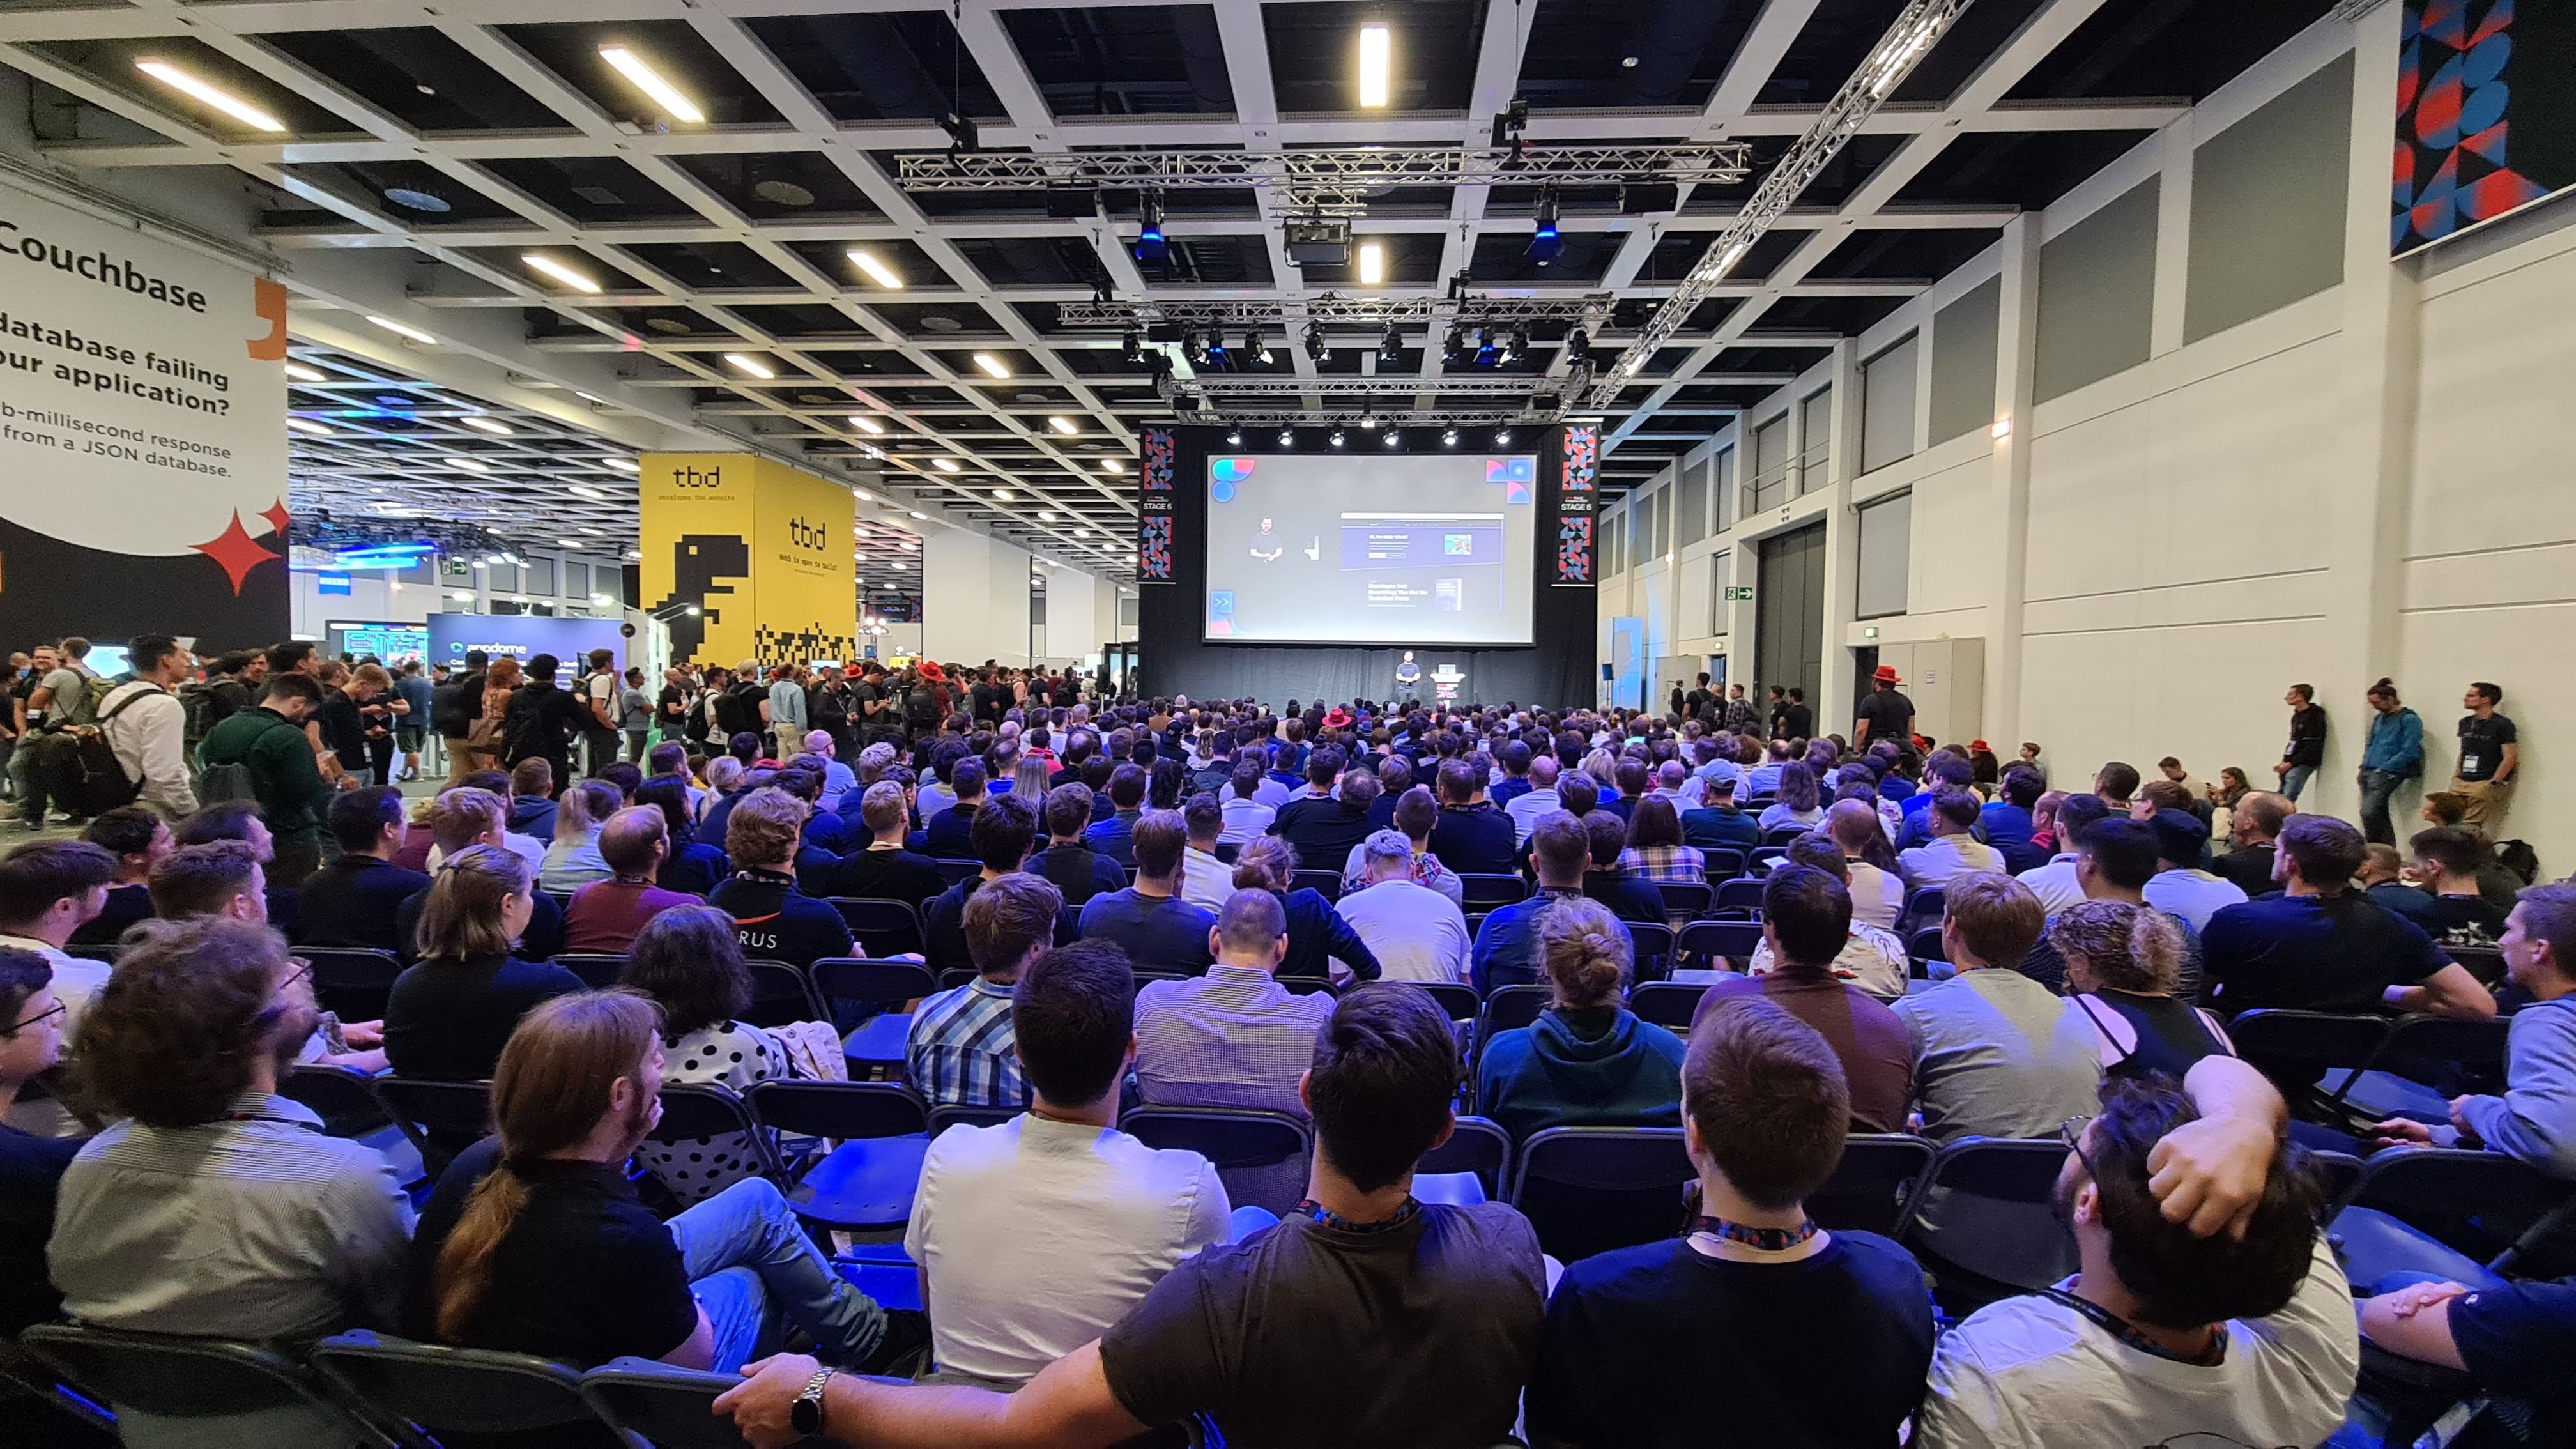 Eddy Vinck standing on stage at WeAreDevelopers World Congress in Berlin talking about Astro